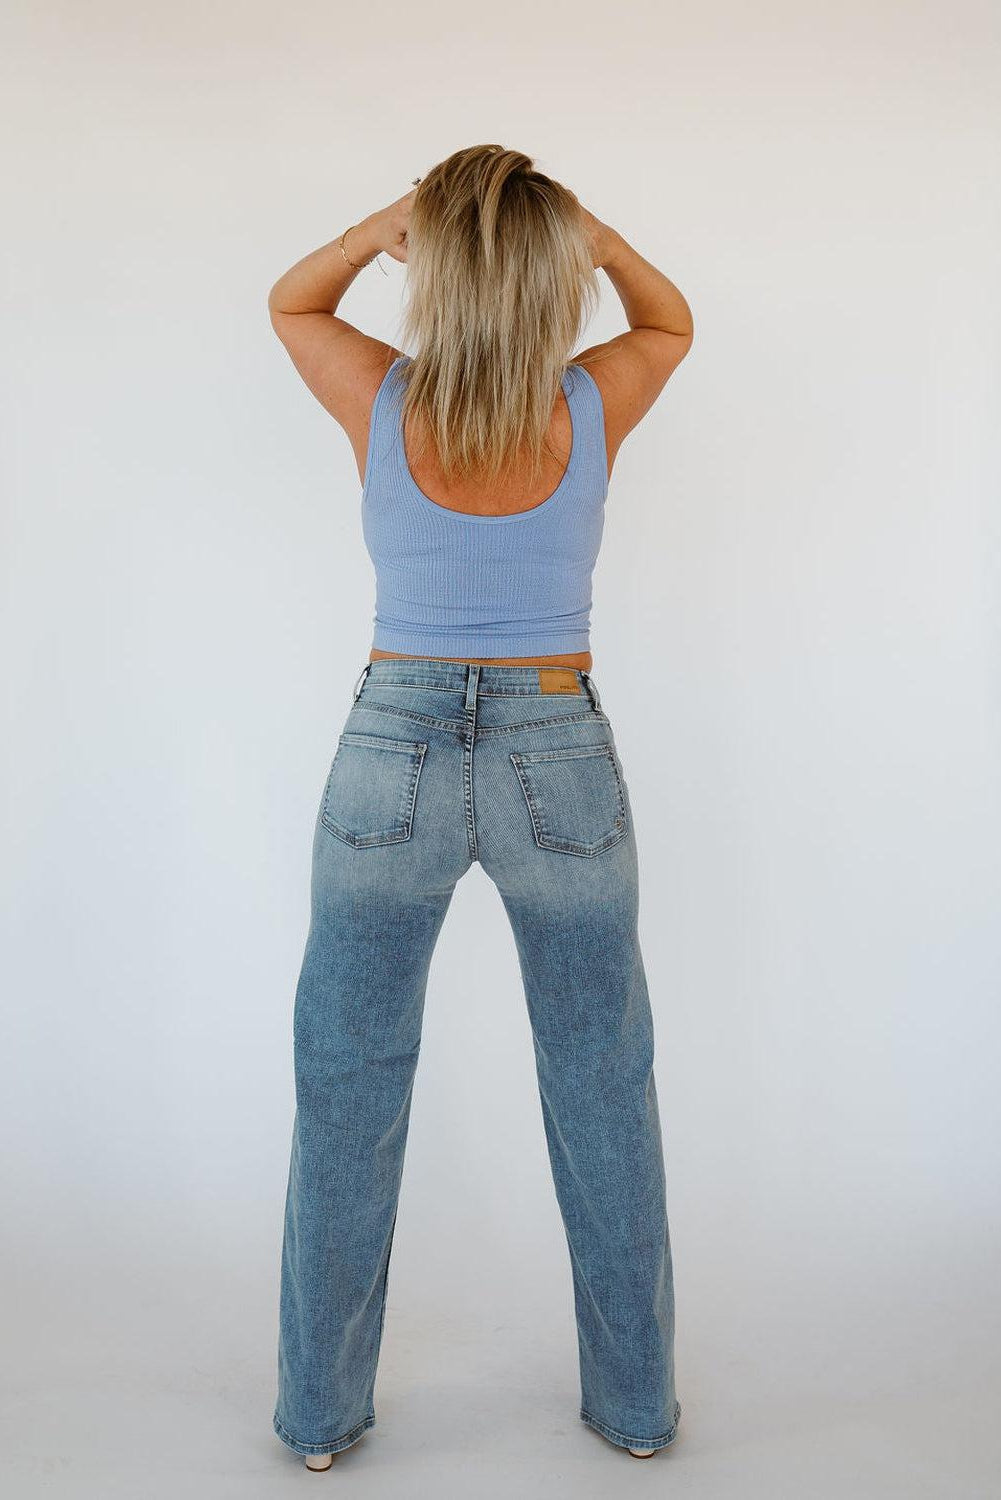 Shop Coco Mid-Rise Wide Leg Light Wash Jean - Free Shipping $150+